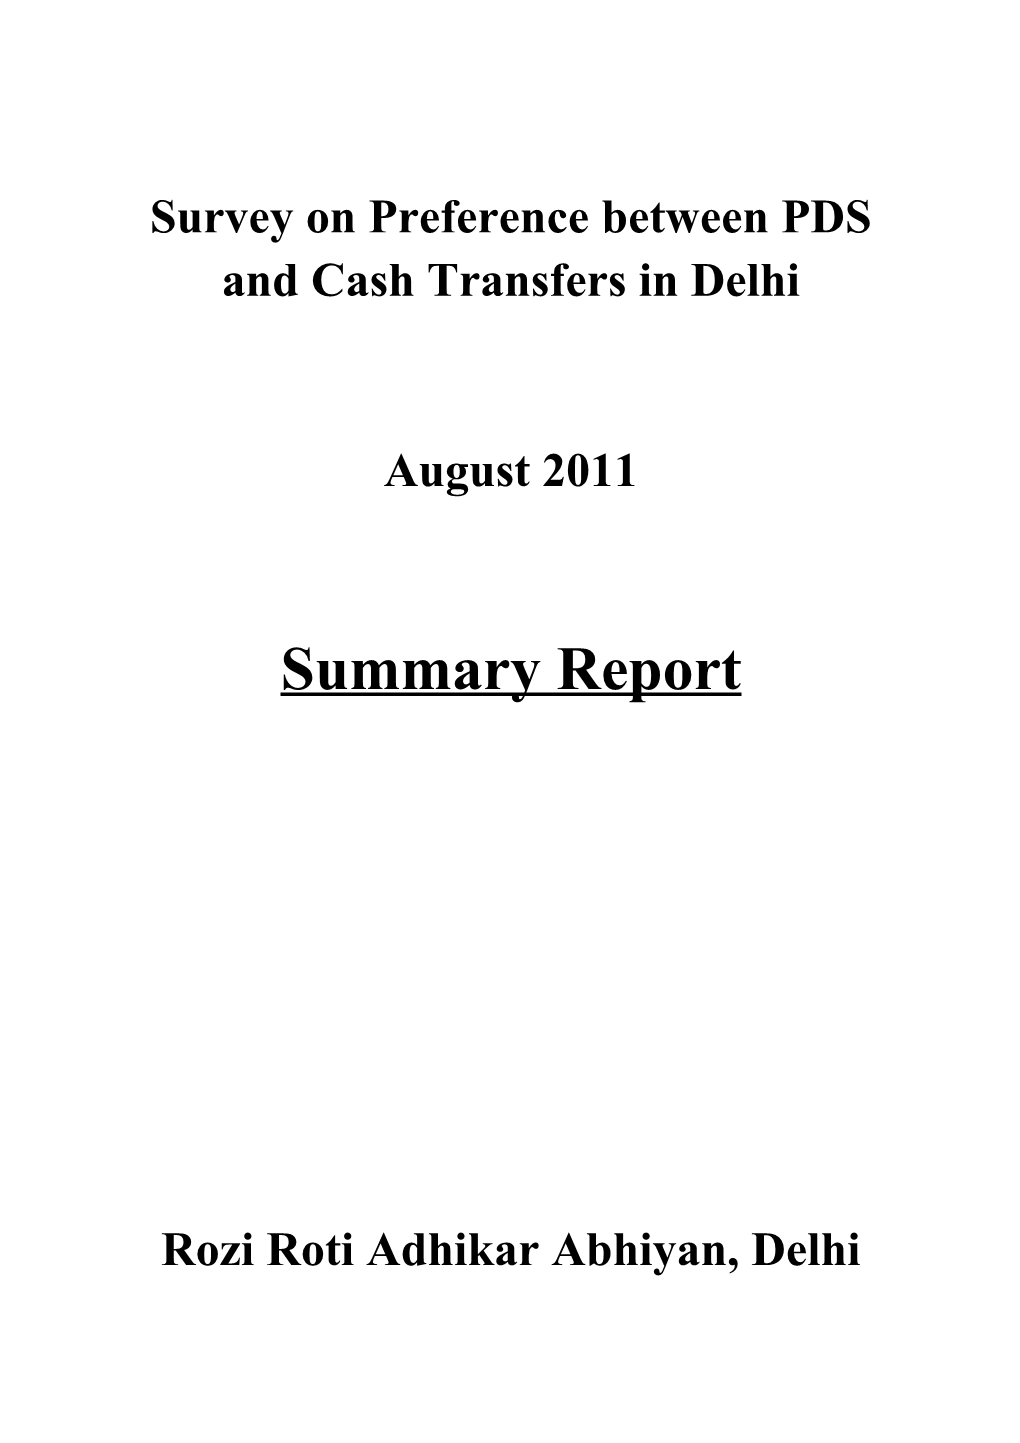 Survey on Preference Between PDS and Cash Transfers in Delhi